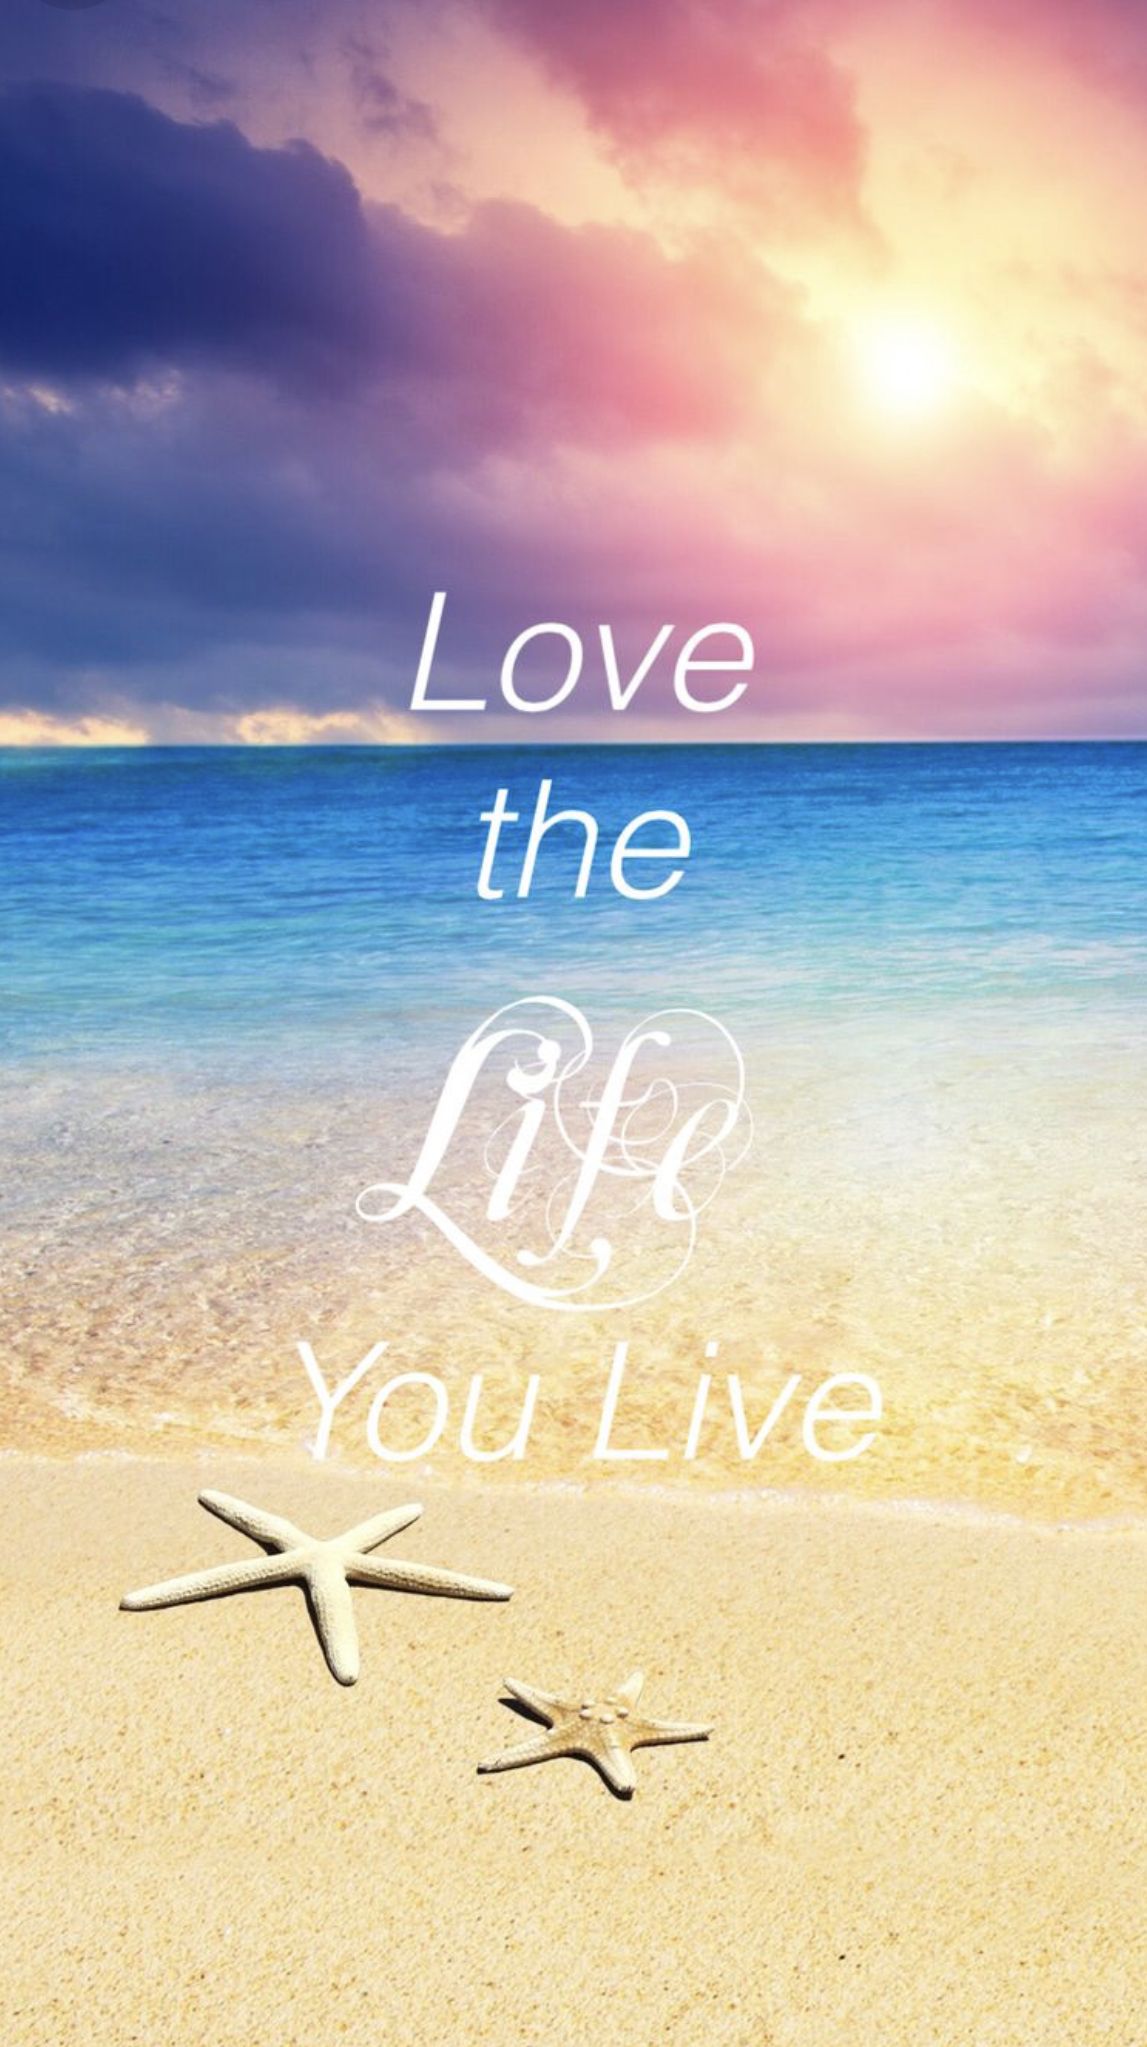 Love Life Wallpapers